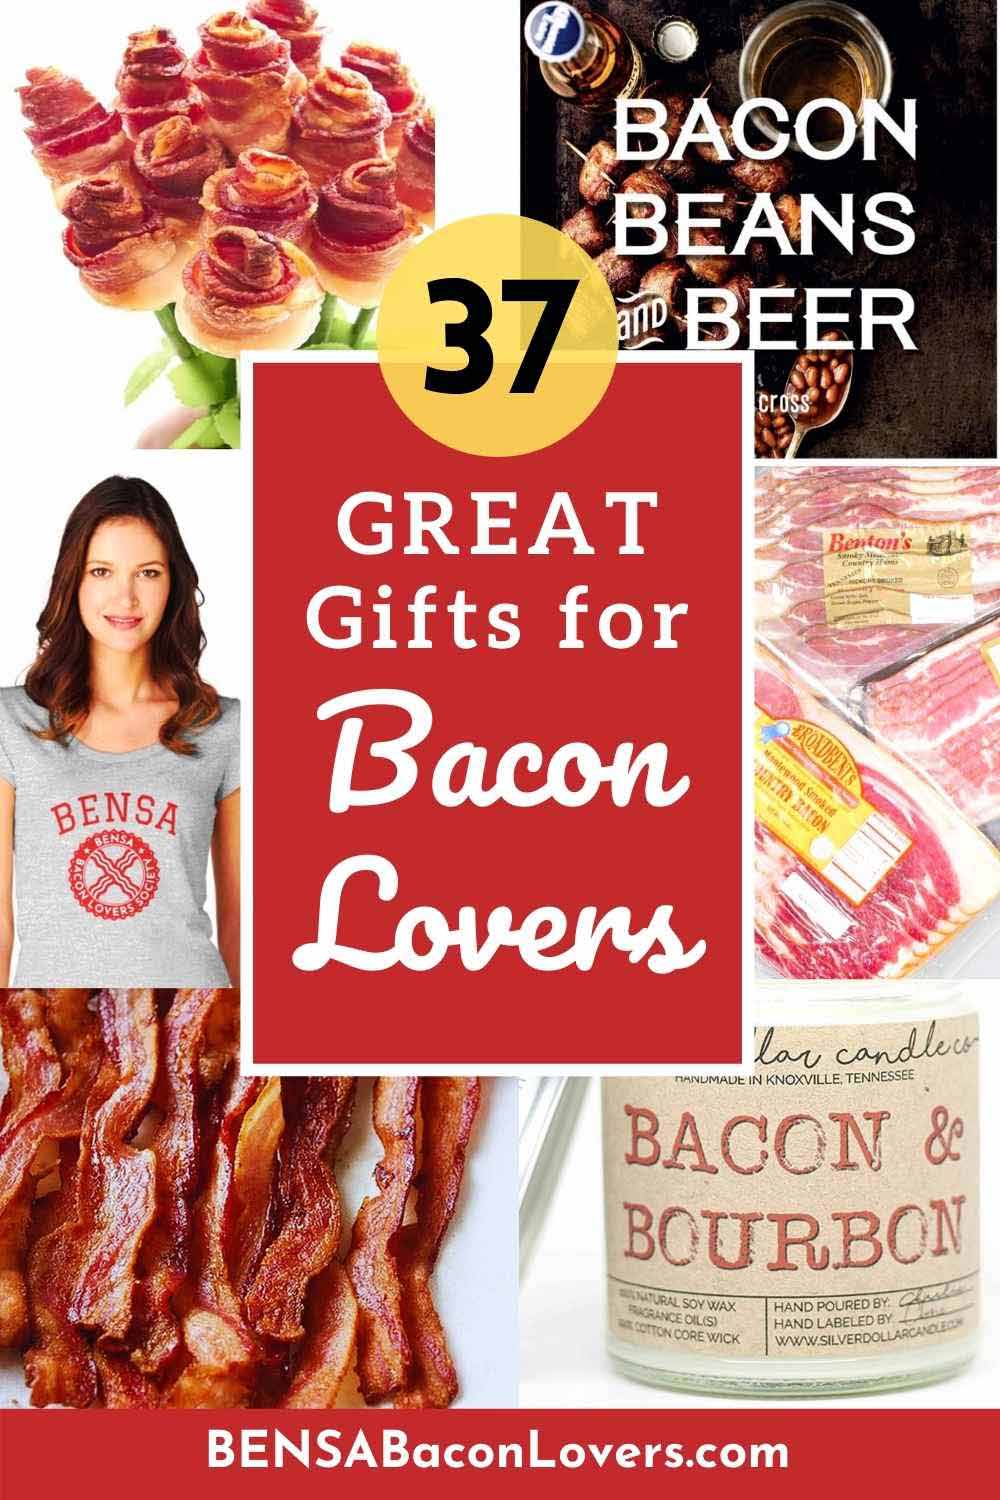 Collage of bacon roses, cookbook, shirt, candle, and gourmet bacon with text: 37 Great Gifts for Bacon Lovers.